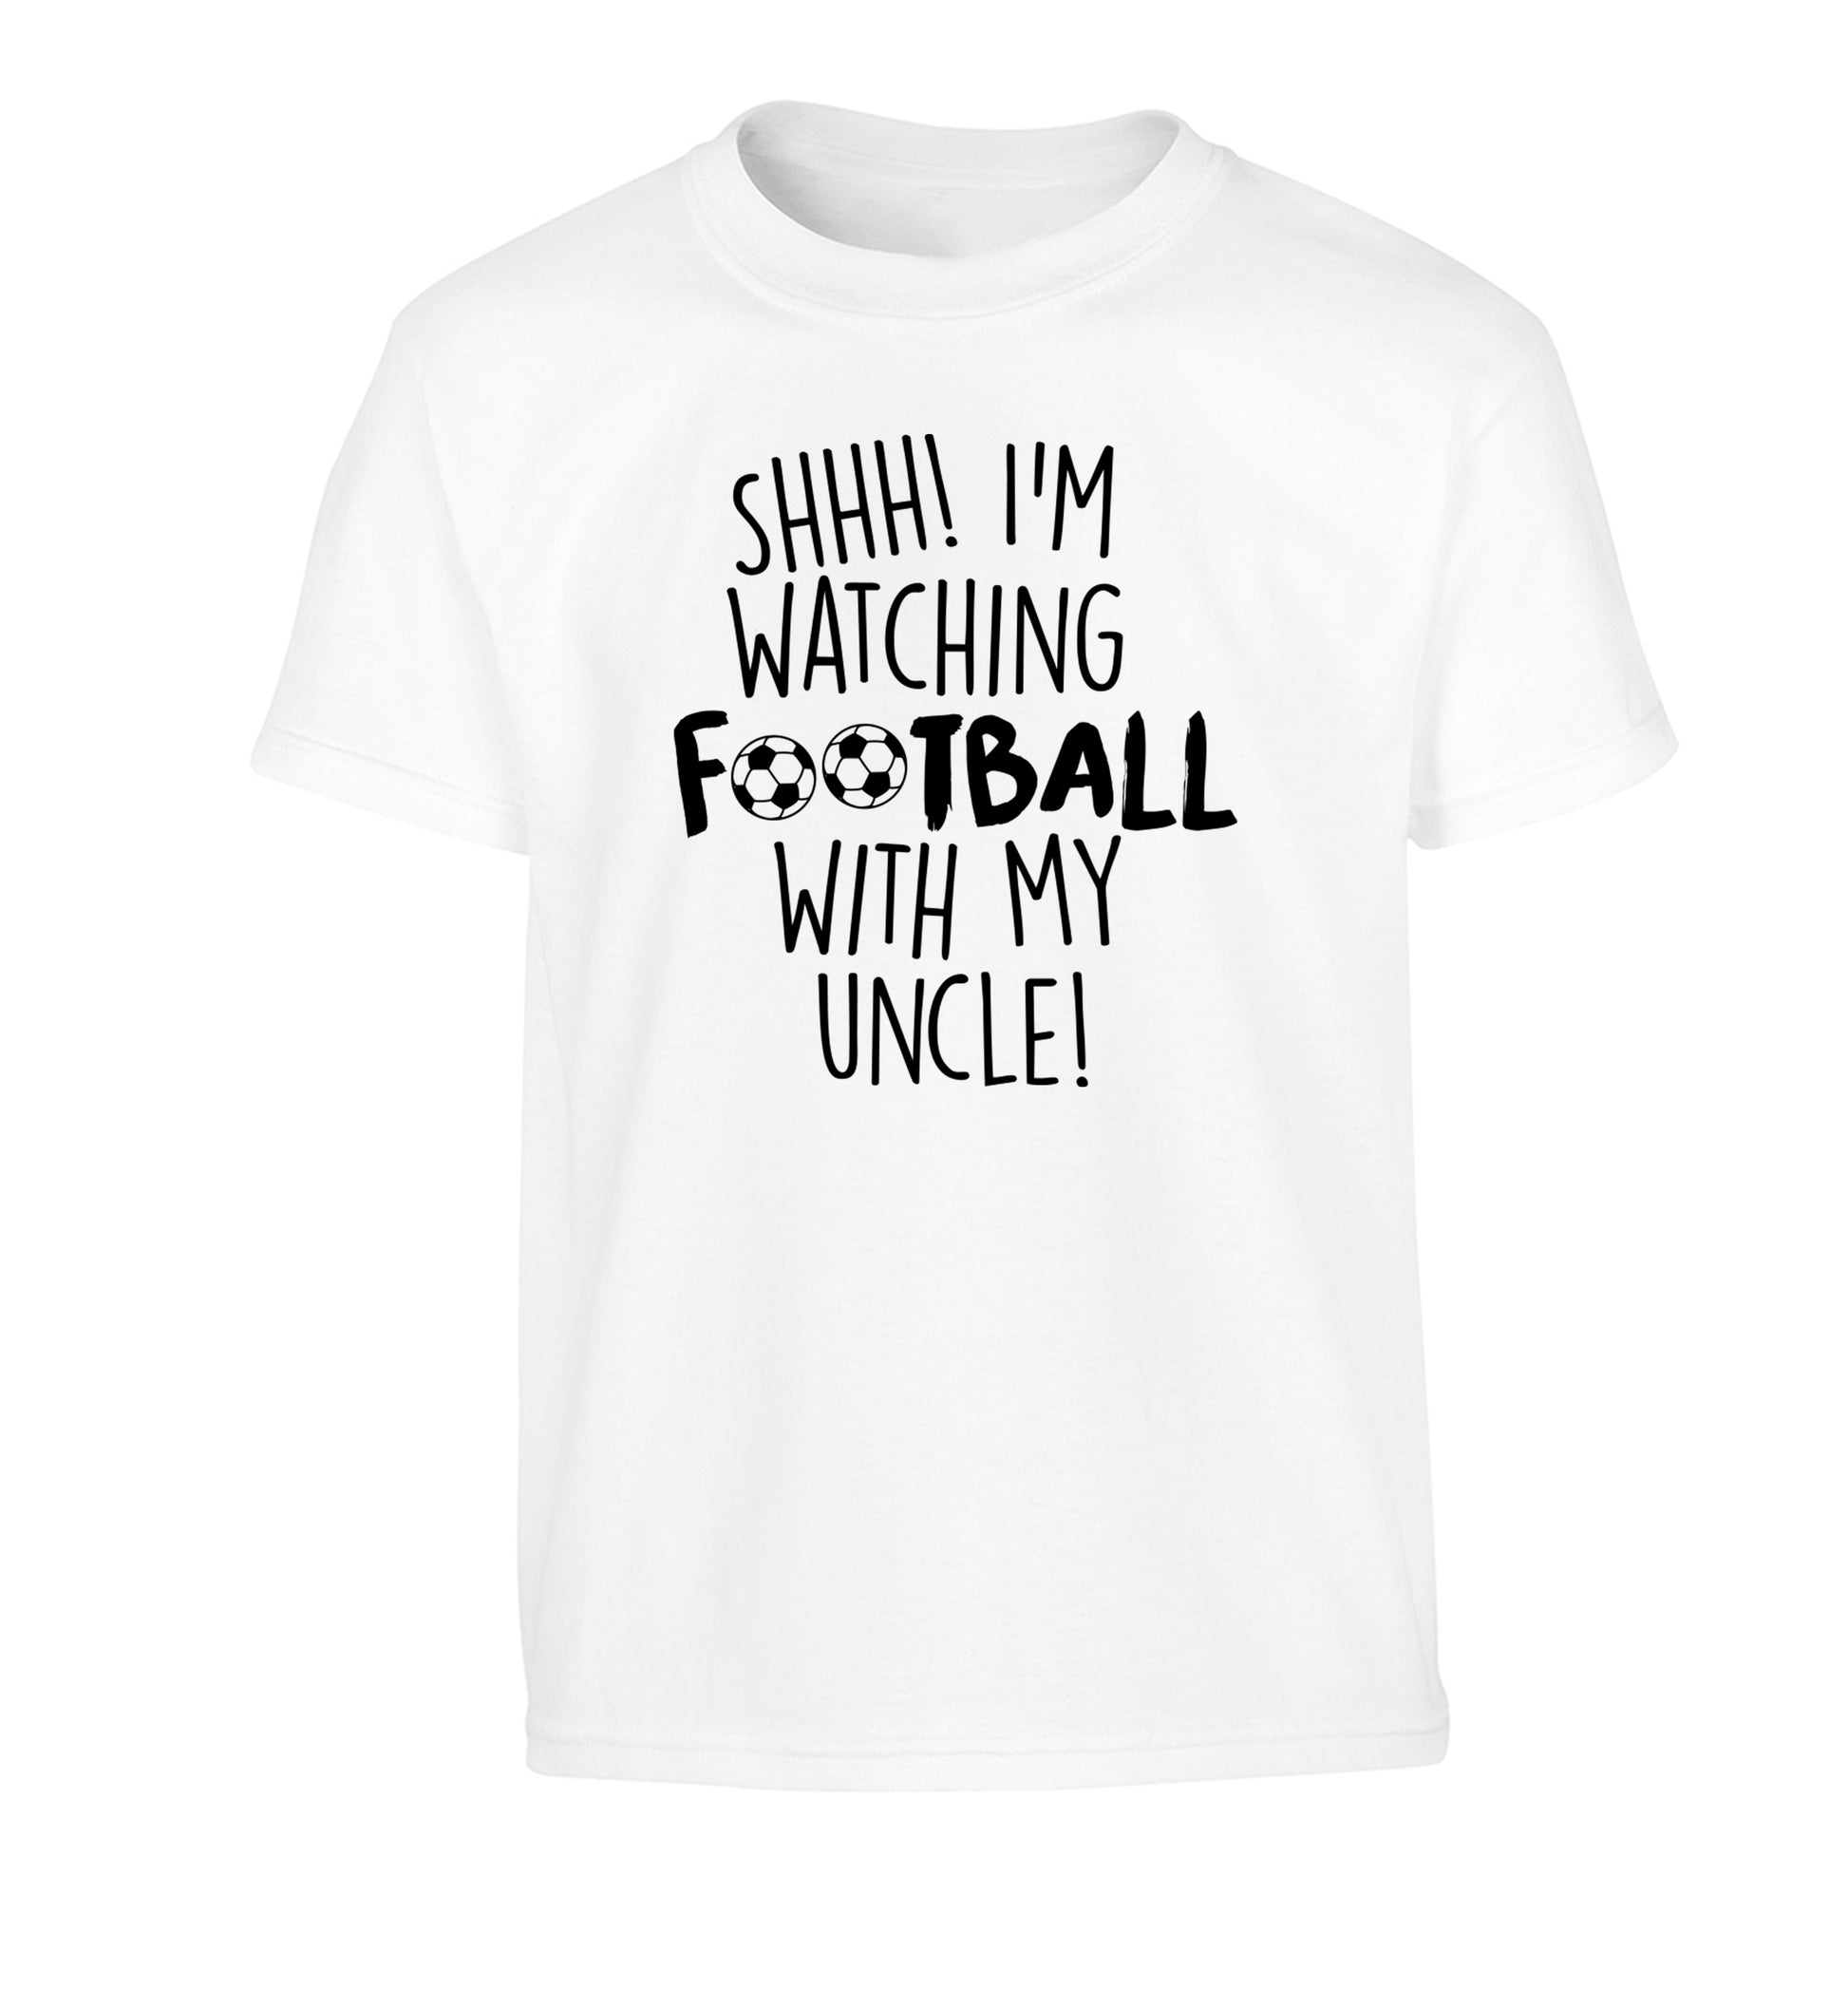 Shhh I'm watching football with my uncle Children's white Tshirt 12-14 Years